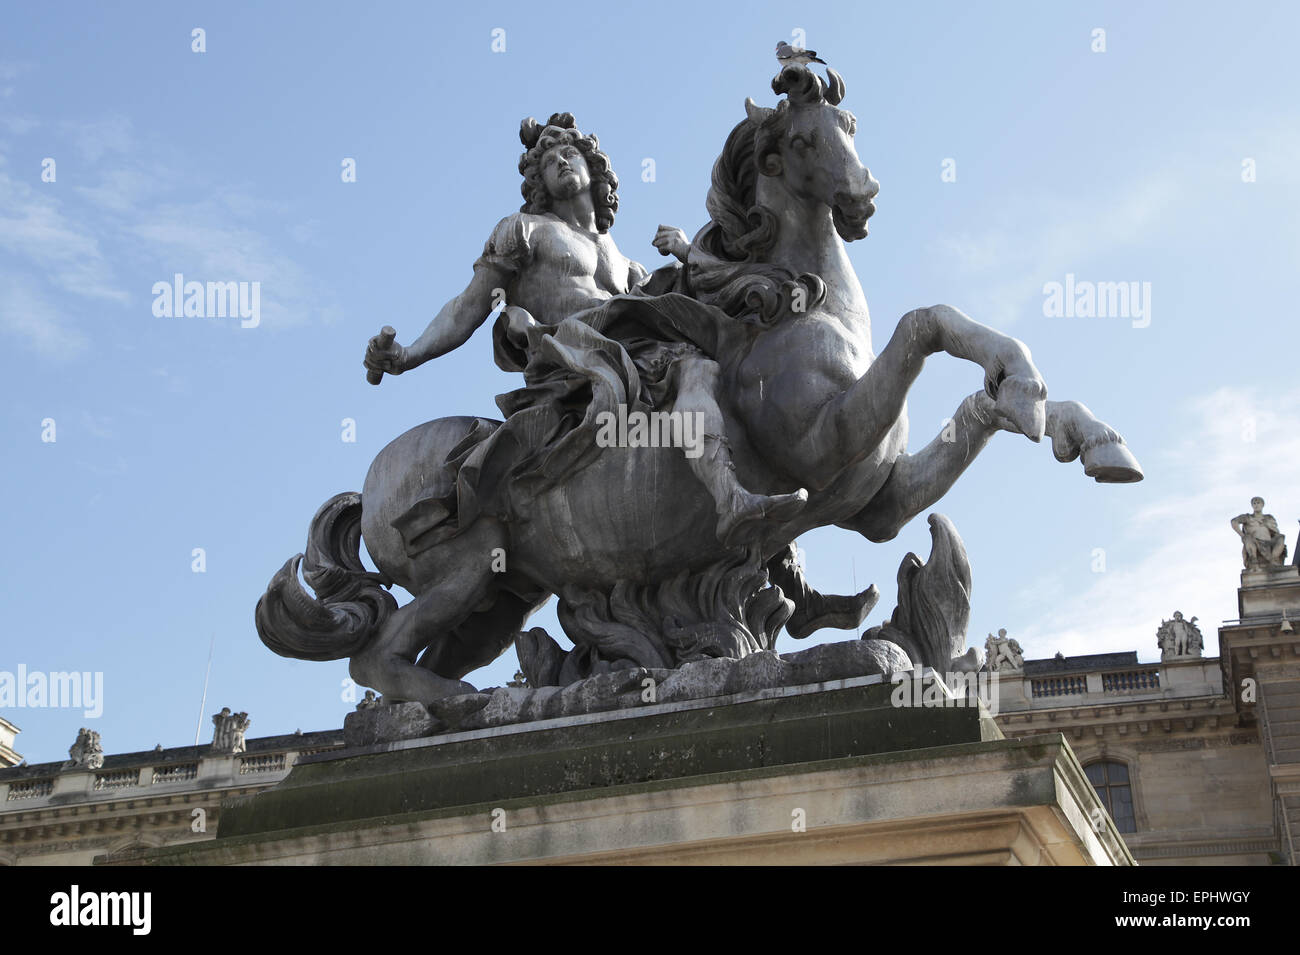 Statue of King Louis XIV at the Louvre museum Paris France Stock Photo